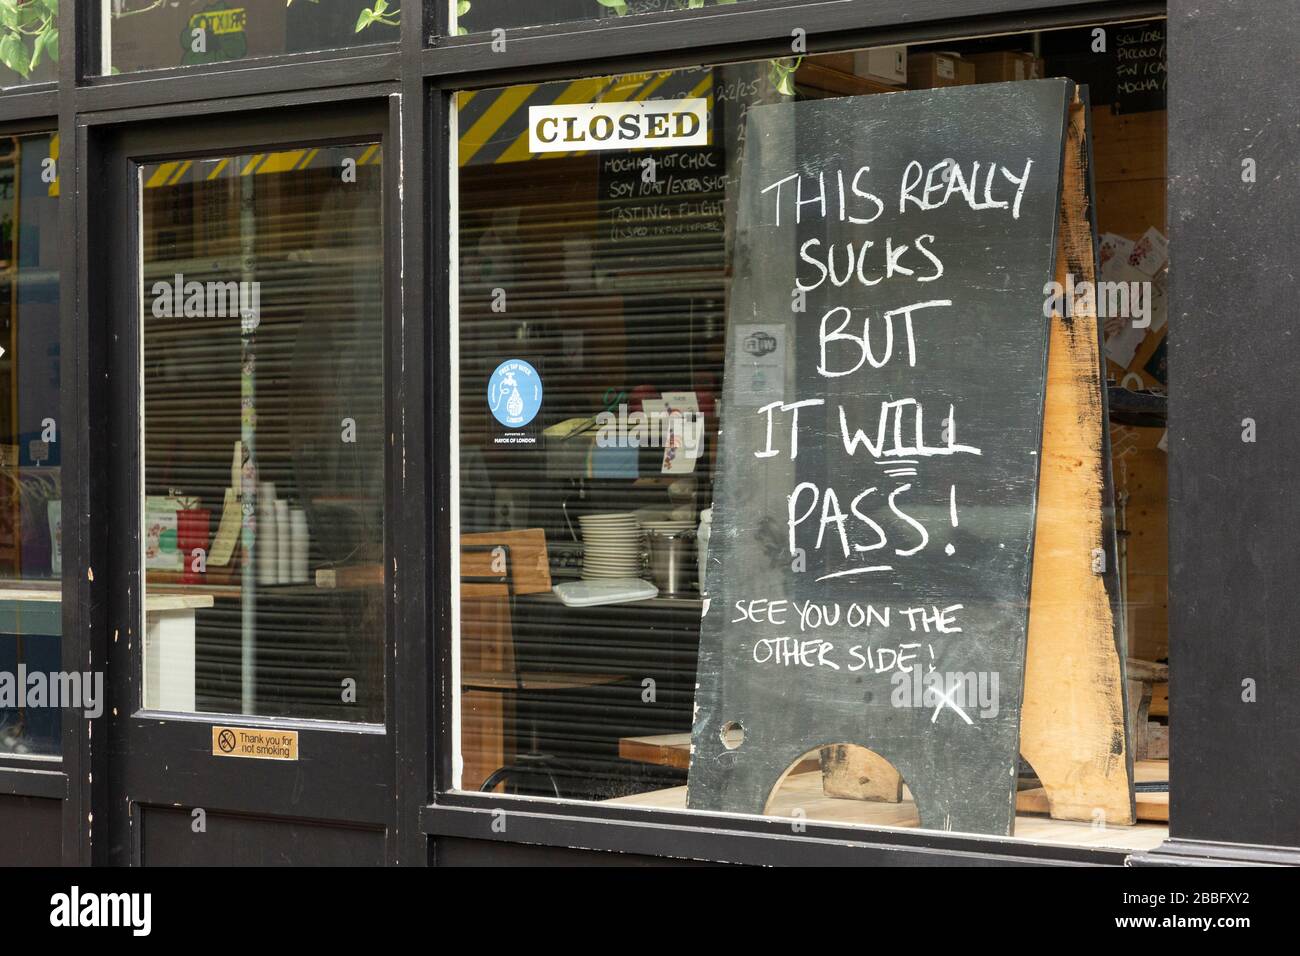 Federation Coffee in Brixton Village closed during the London lockdown due to the spread of Covid-19. Taken on 31 March 2020 Stock Photo